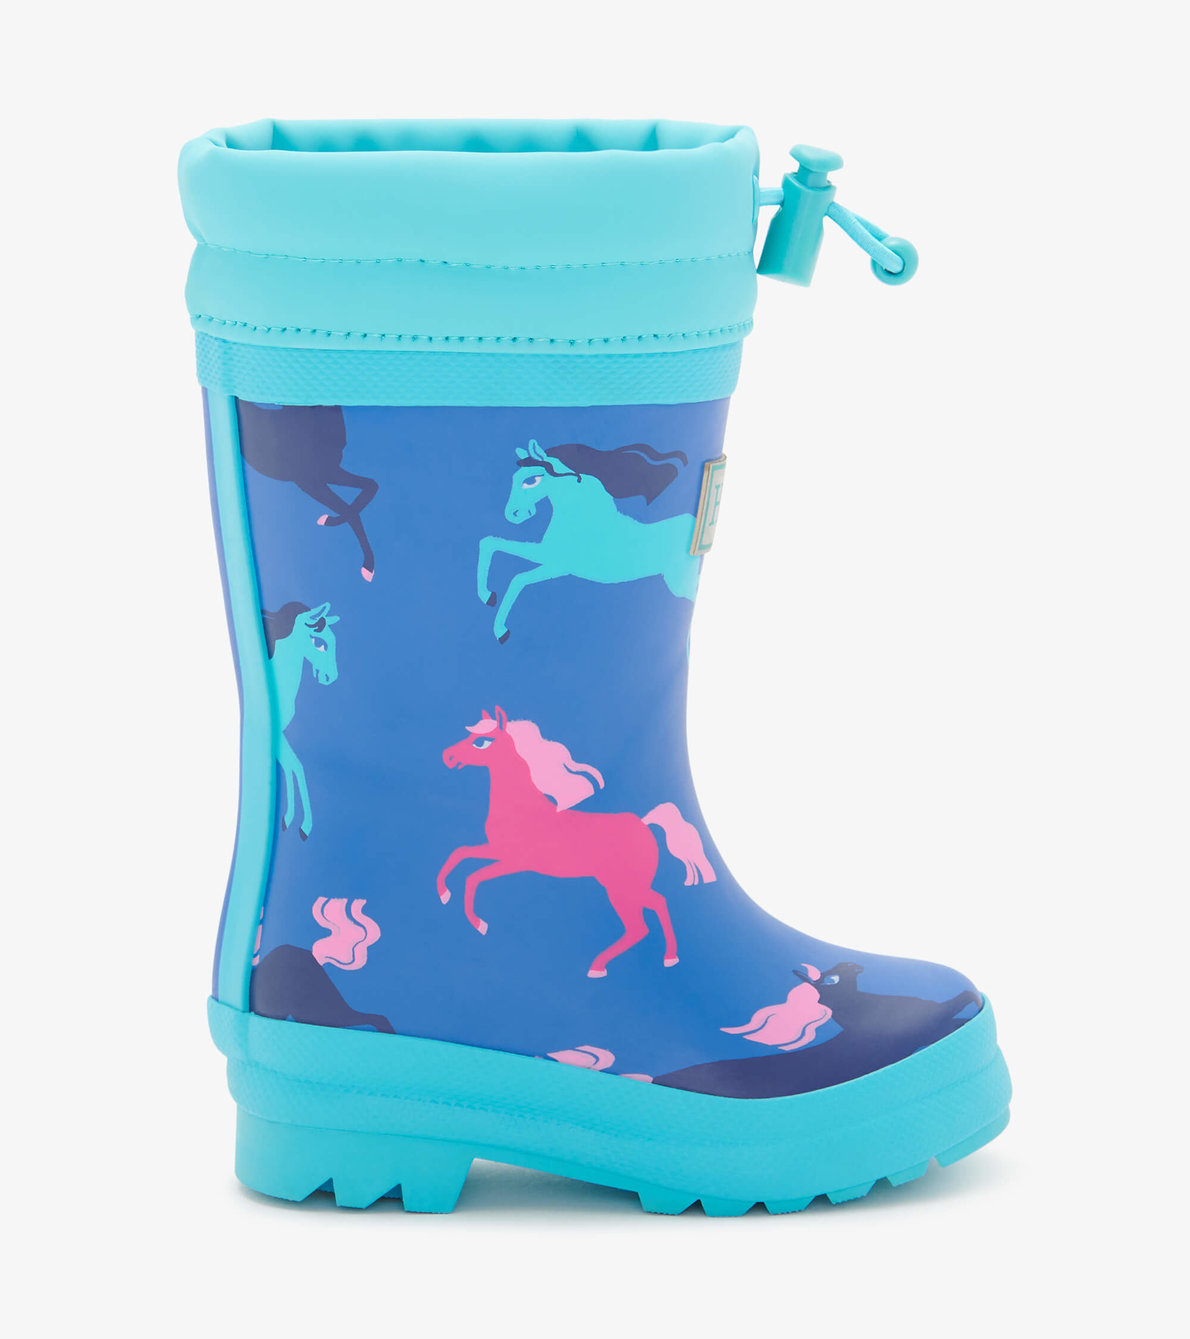 View larger image of Prancing Horses Sherpa Lined Baby Wellies